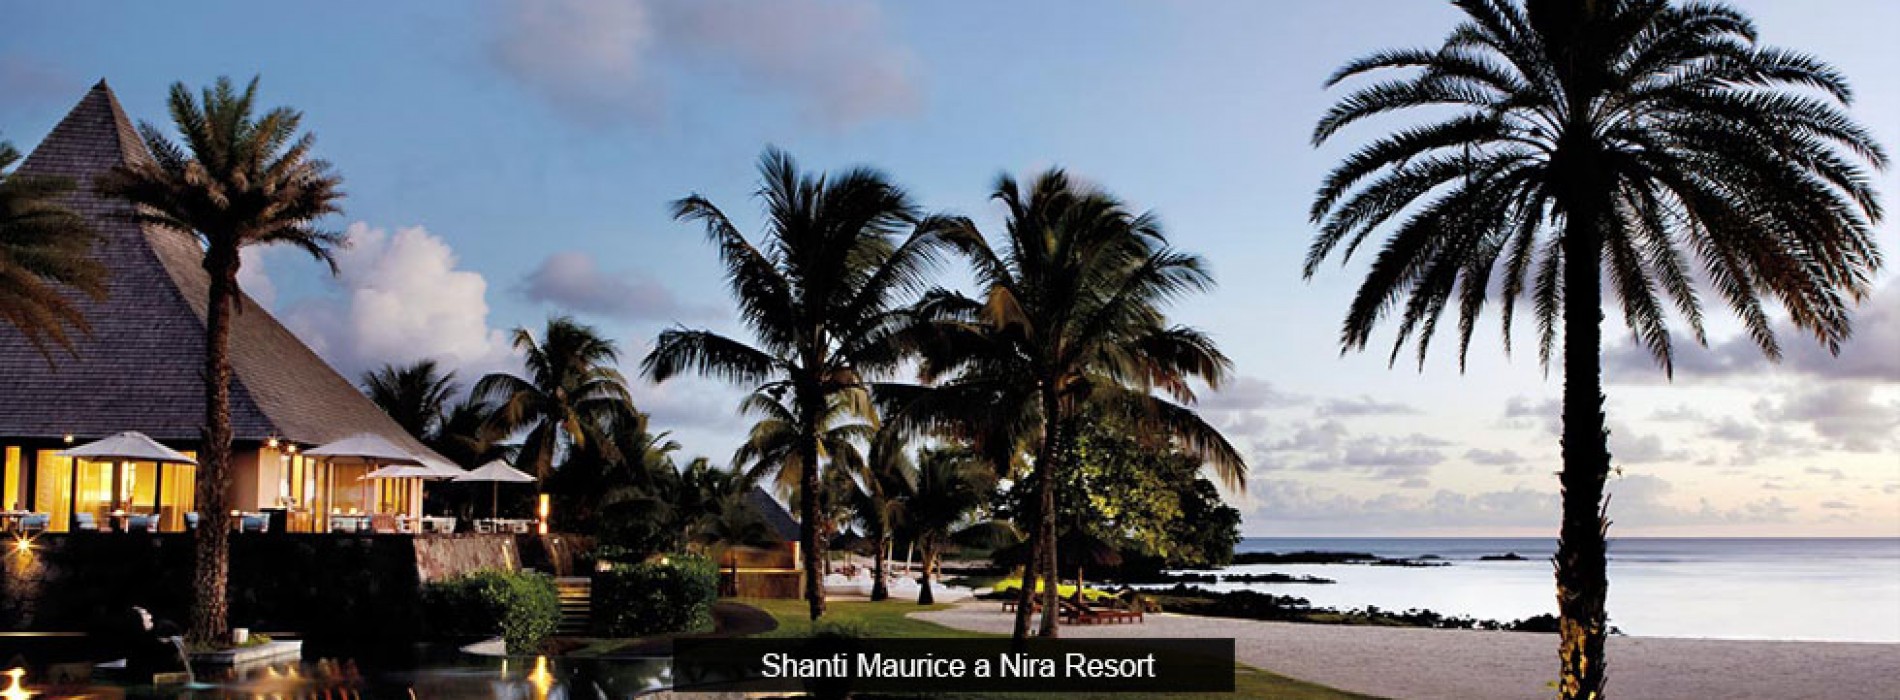 Best Luxury Resorts to Stay in Mauritius